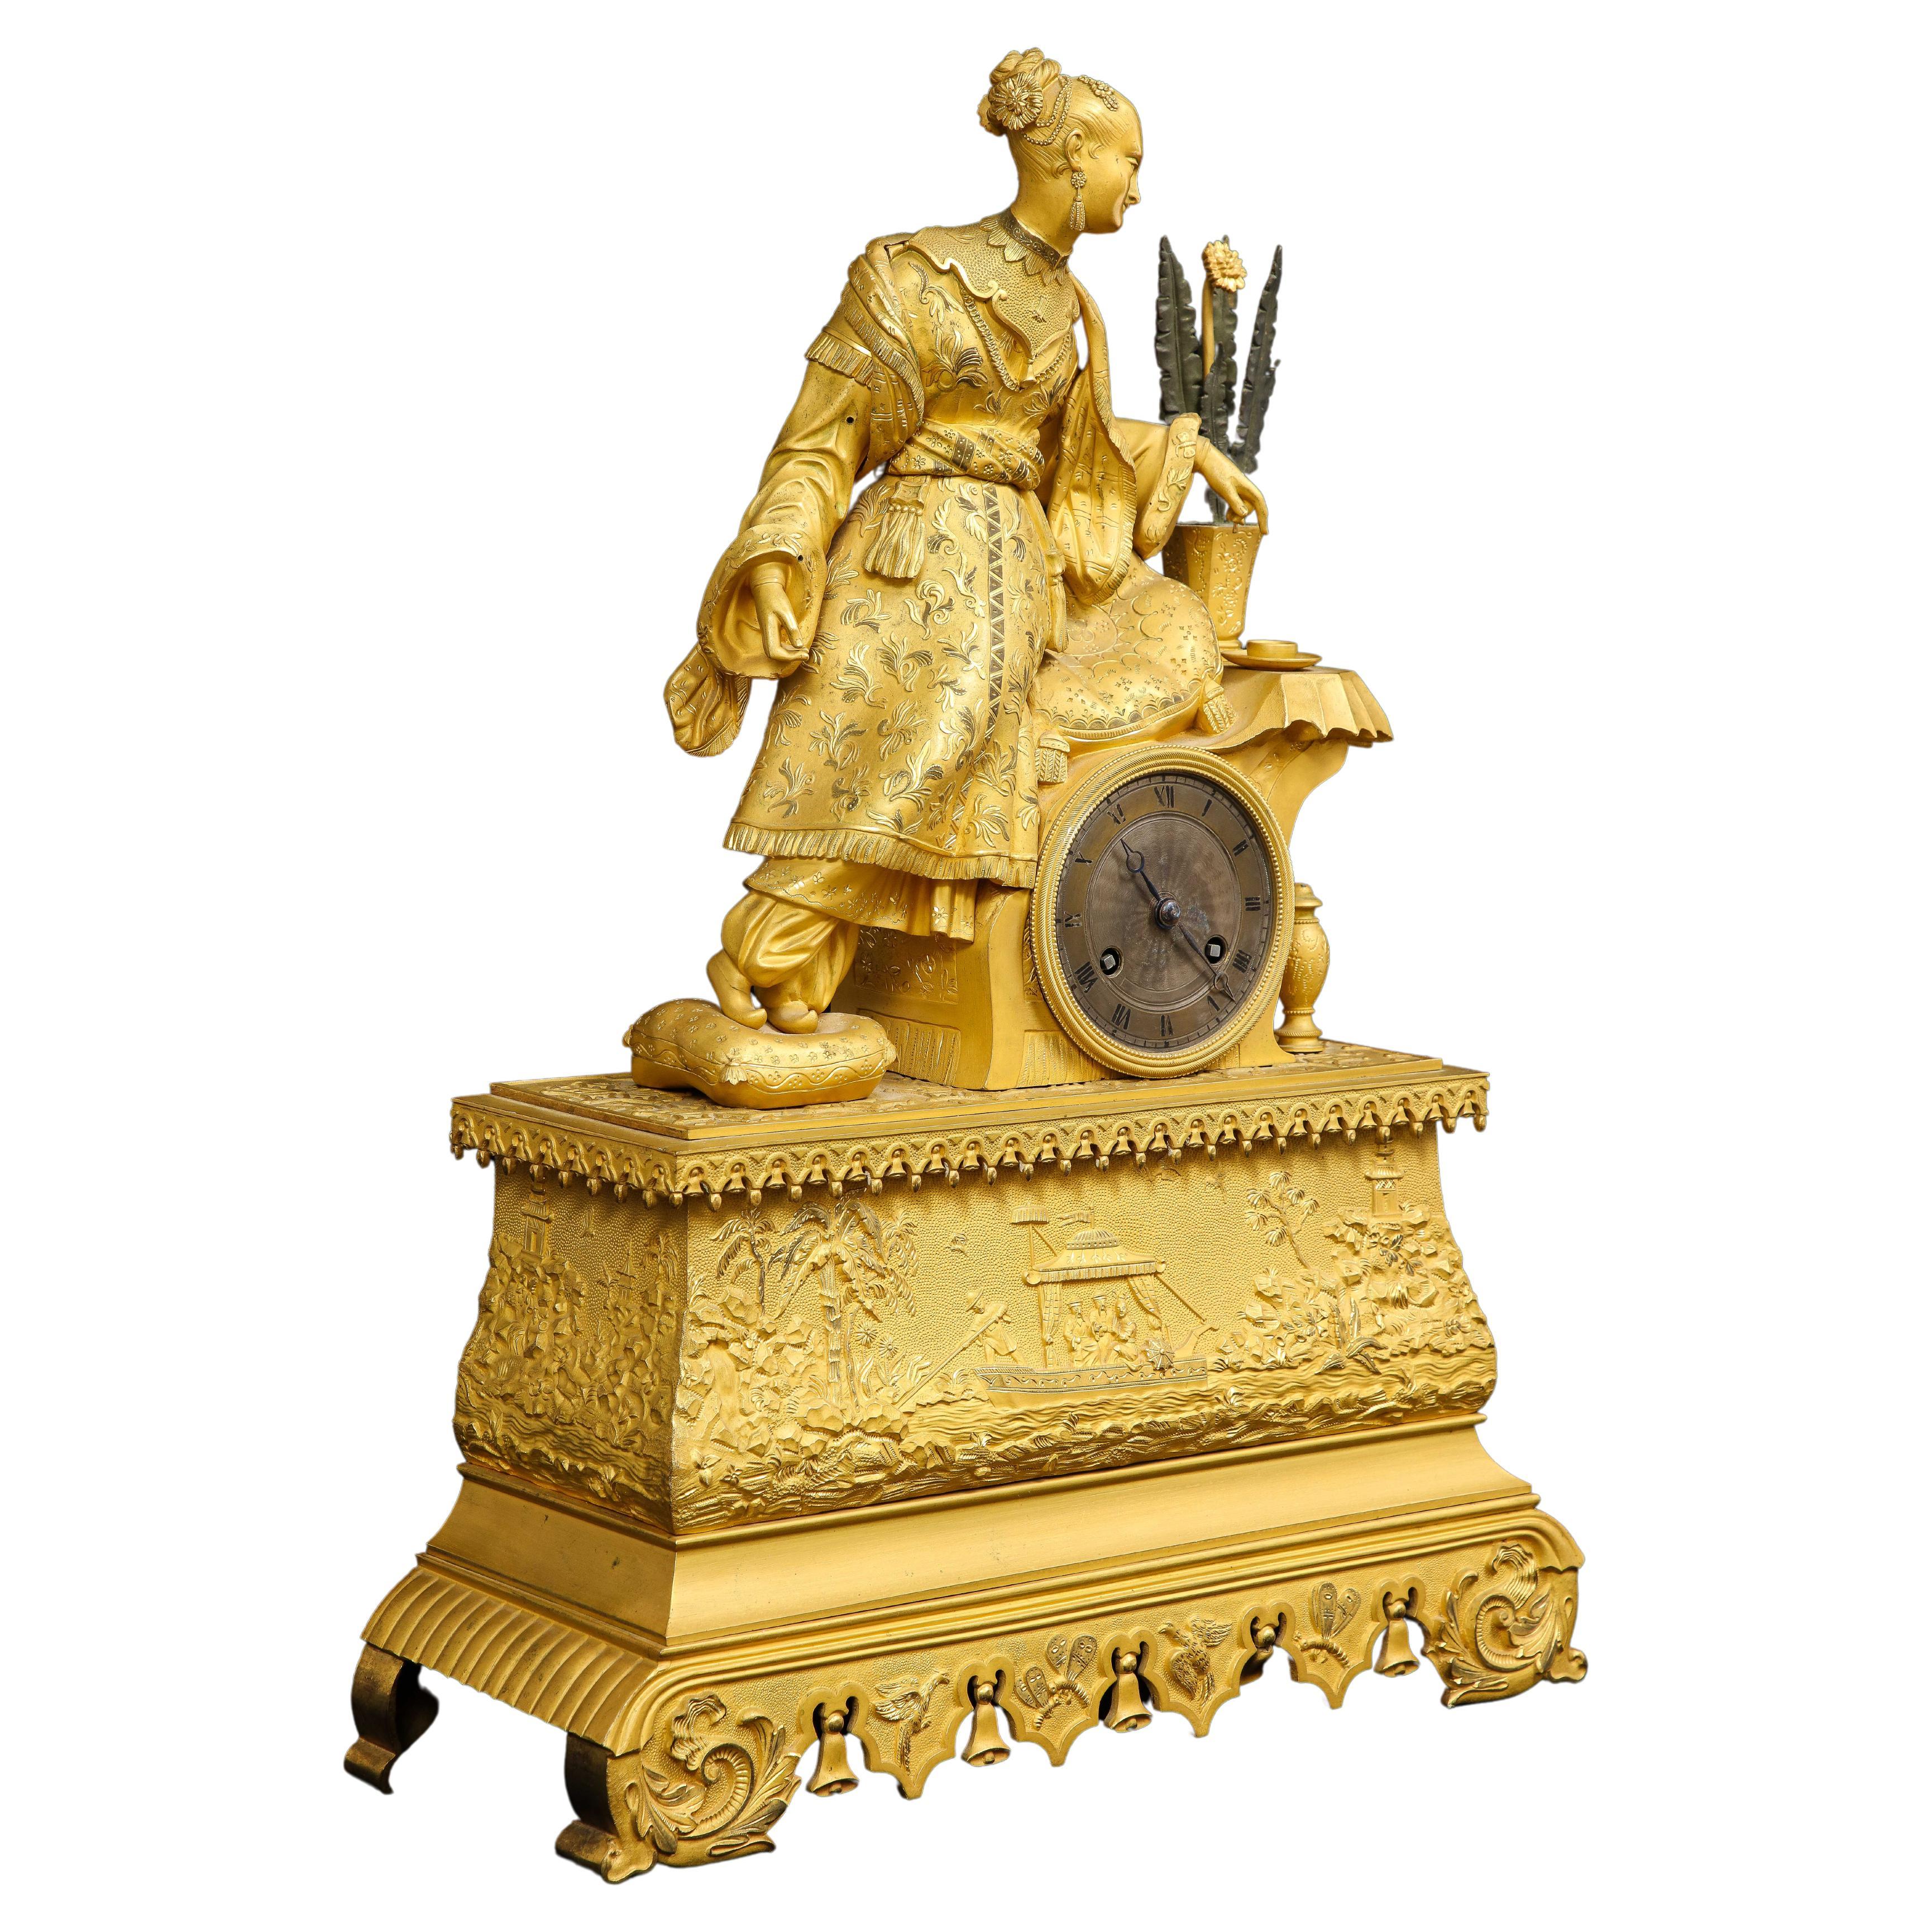 A French 19th Century Dore Bronze Chinoiserie Style Figural clock with a Woman Resting on a Seat. This is a beautiful example of French dore bronze craftsmanship mixed with the Chinoiserie style. The clock is marvelous with a beautiful woman seen